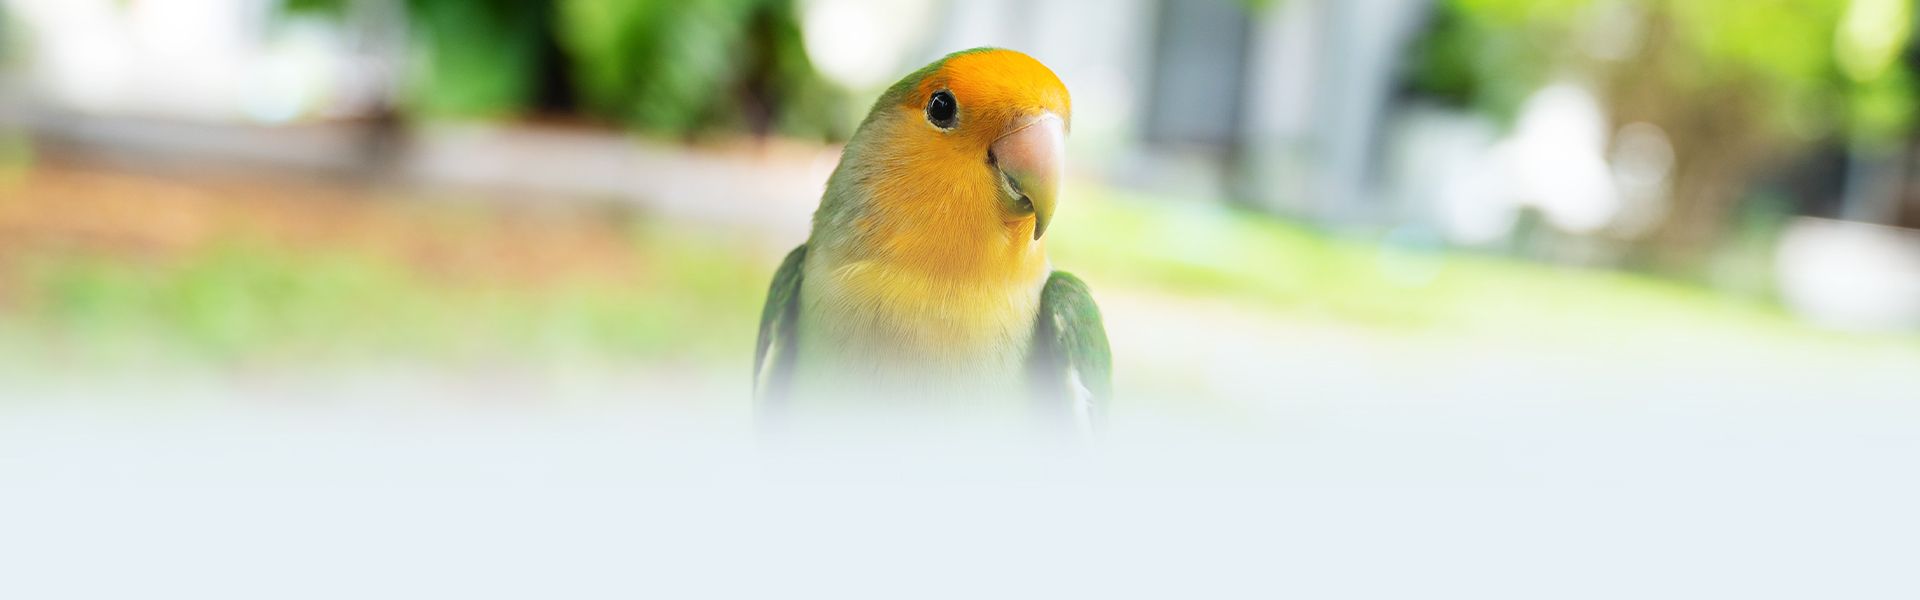 cute lovebird with a blur background